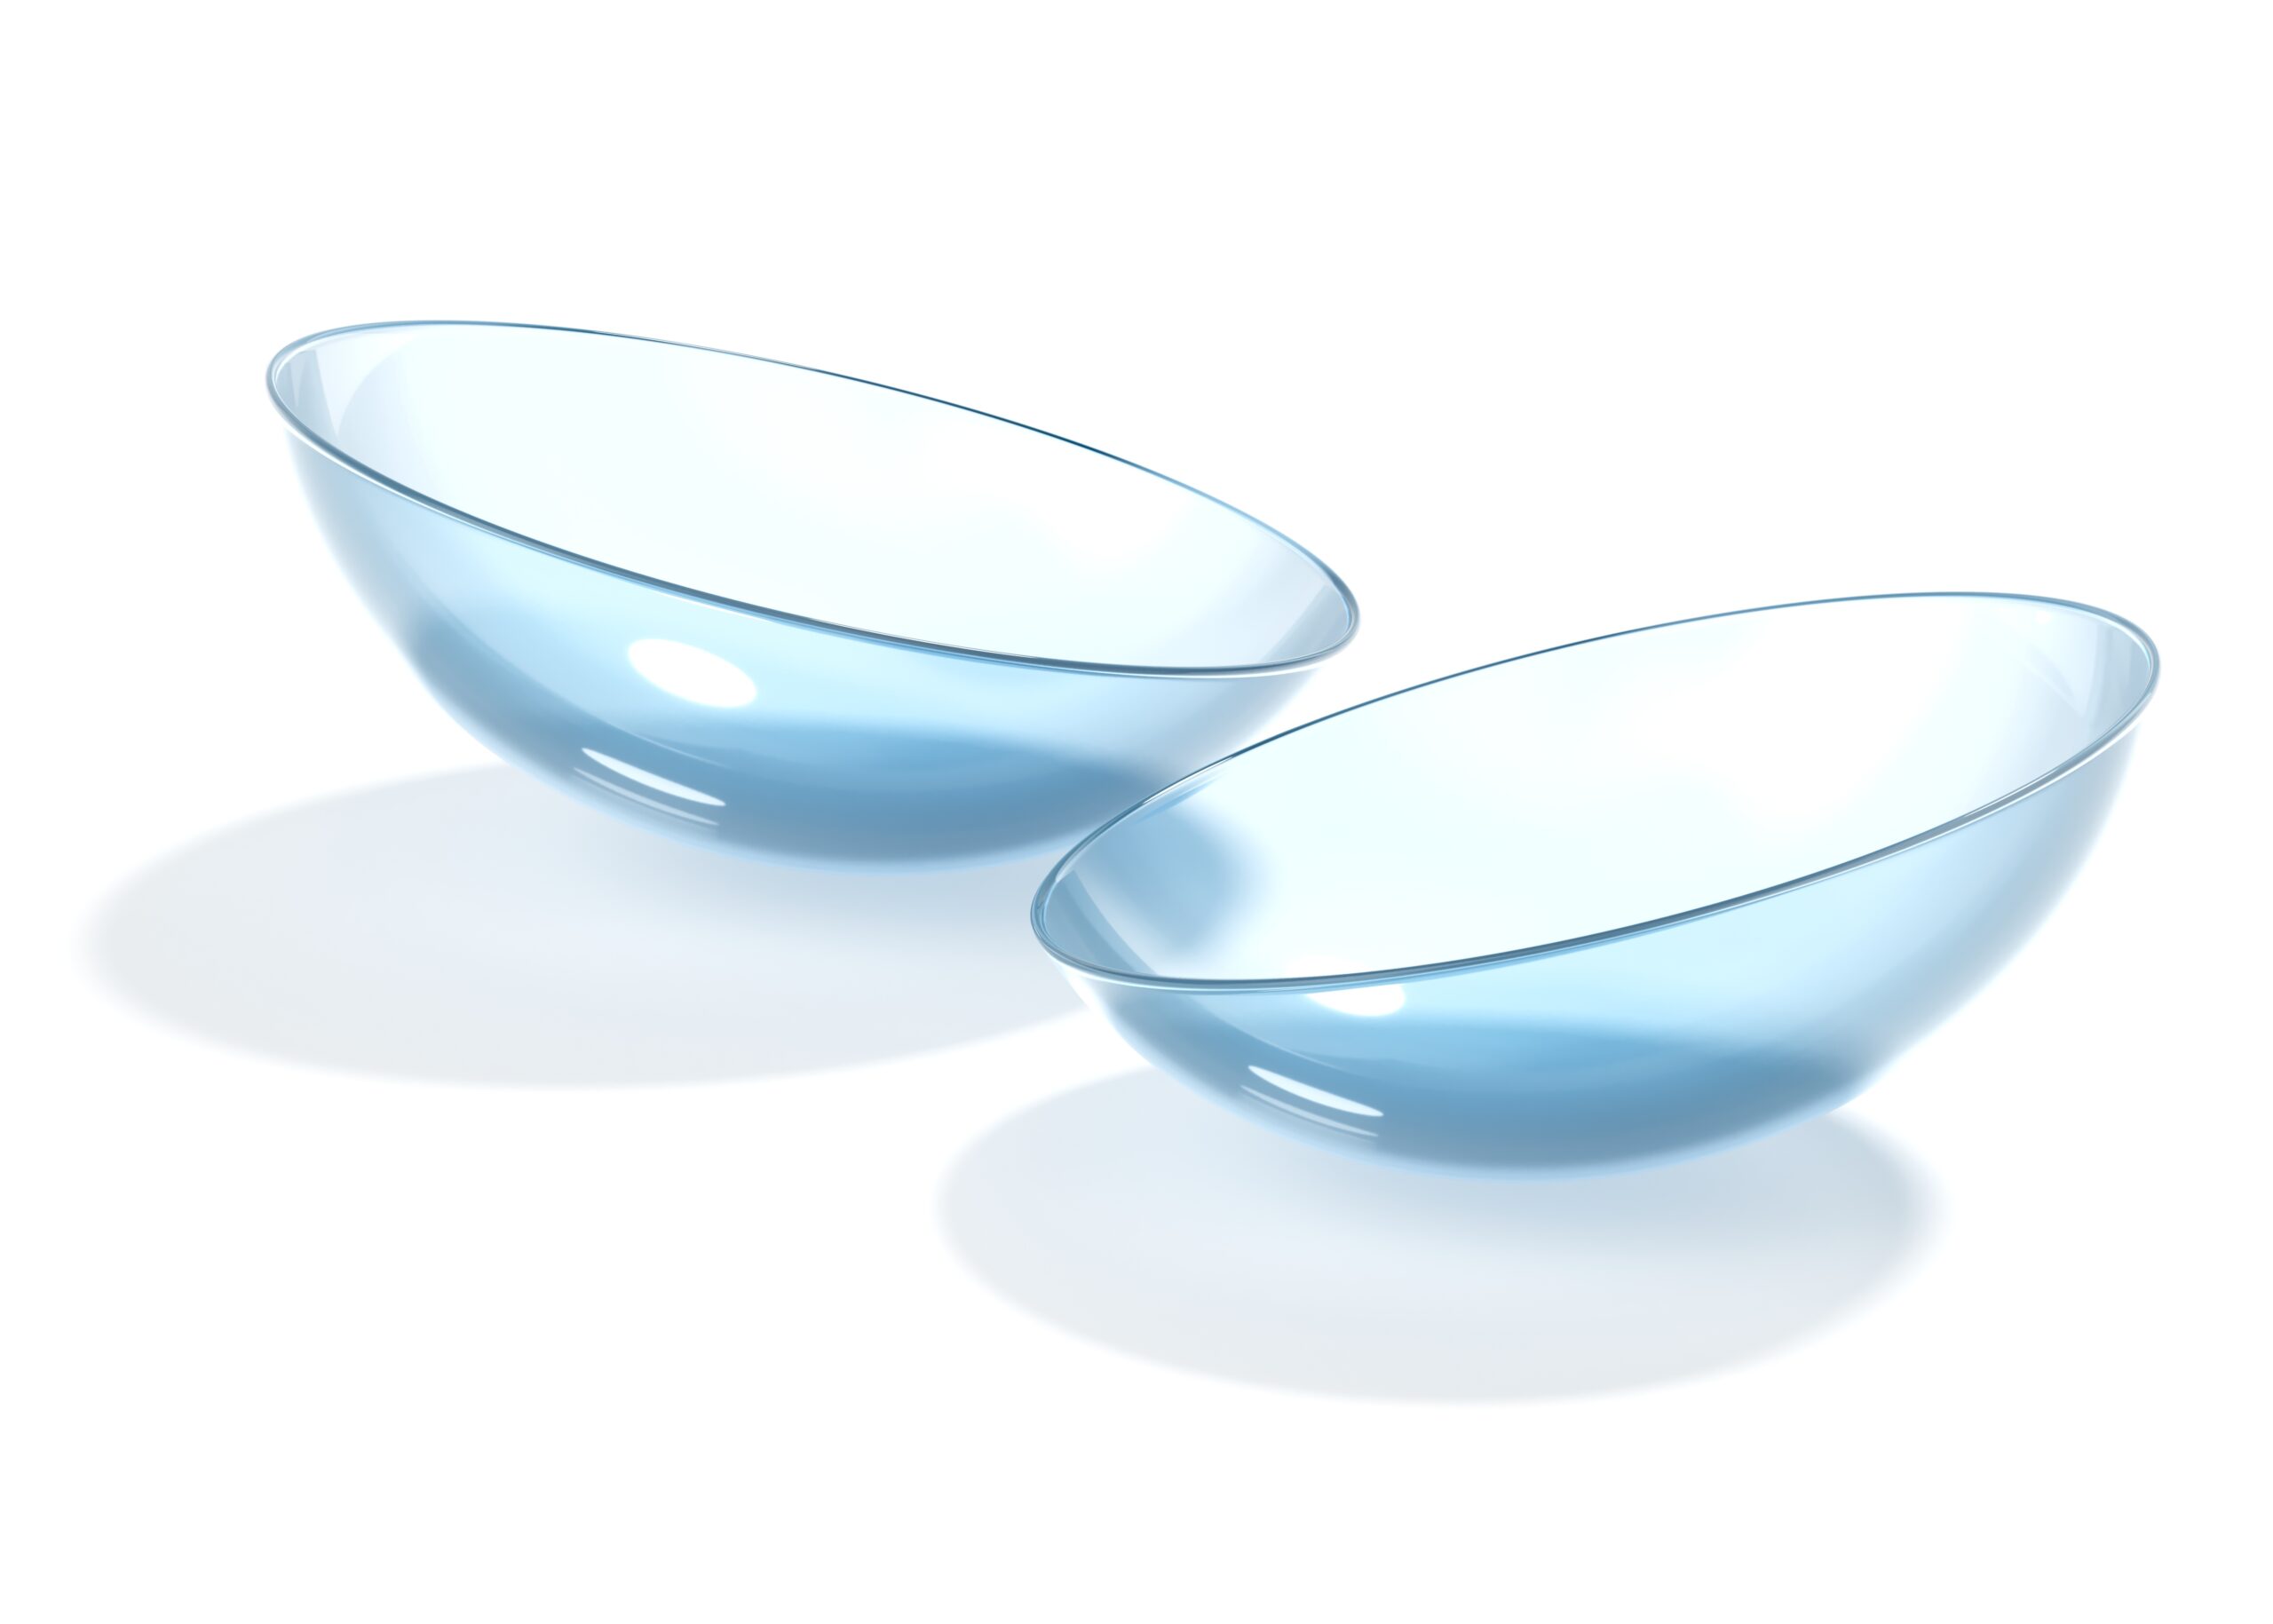 Alcon, J&J Agree to Settle Contact Lens Price-Fixing Suit for $75M